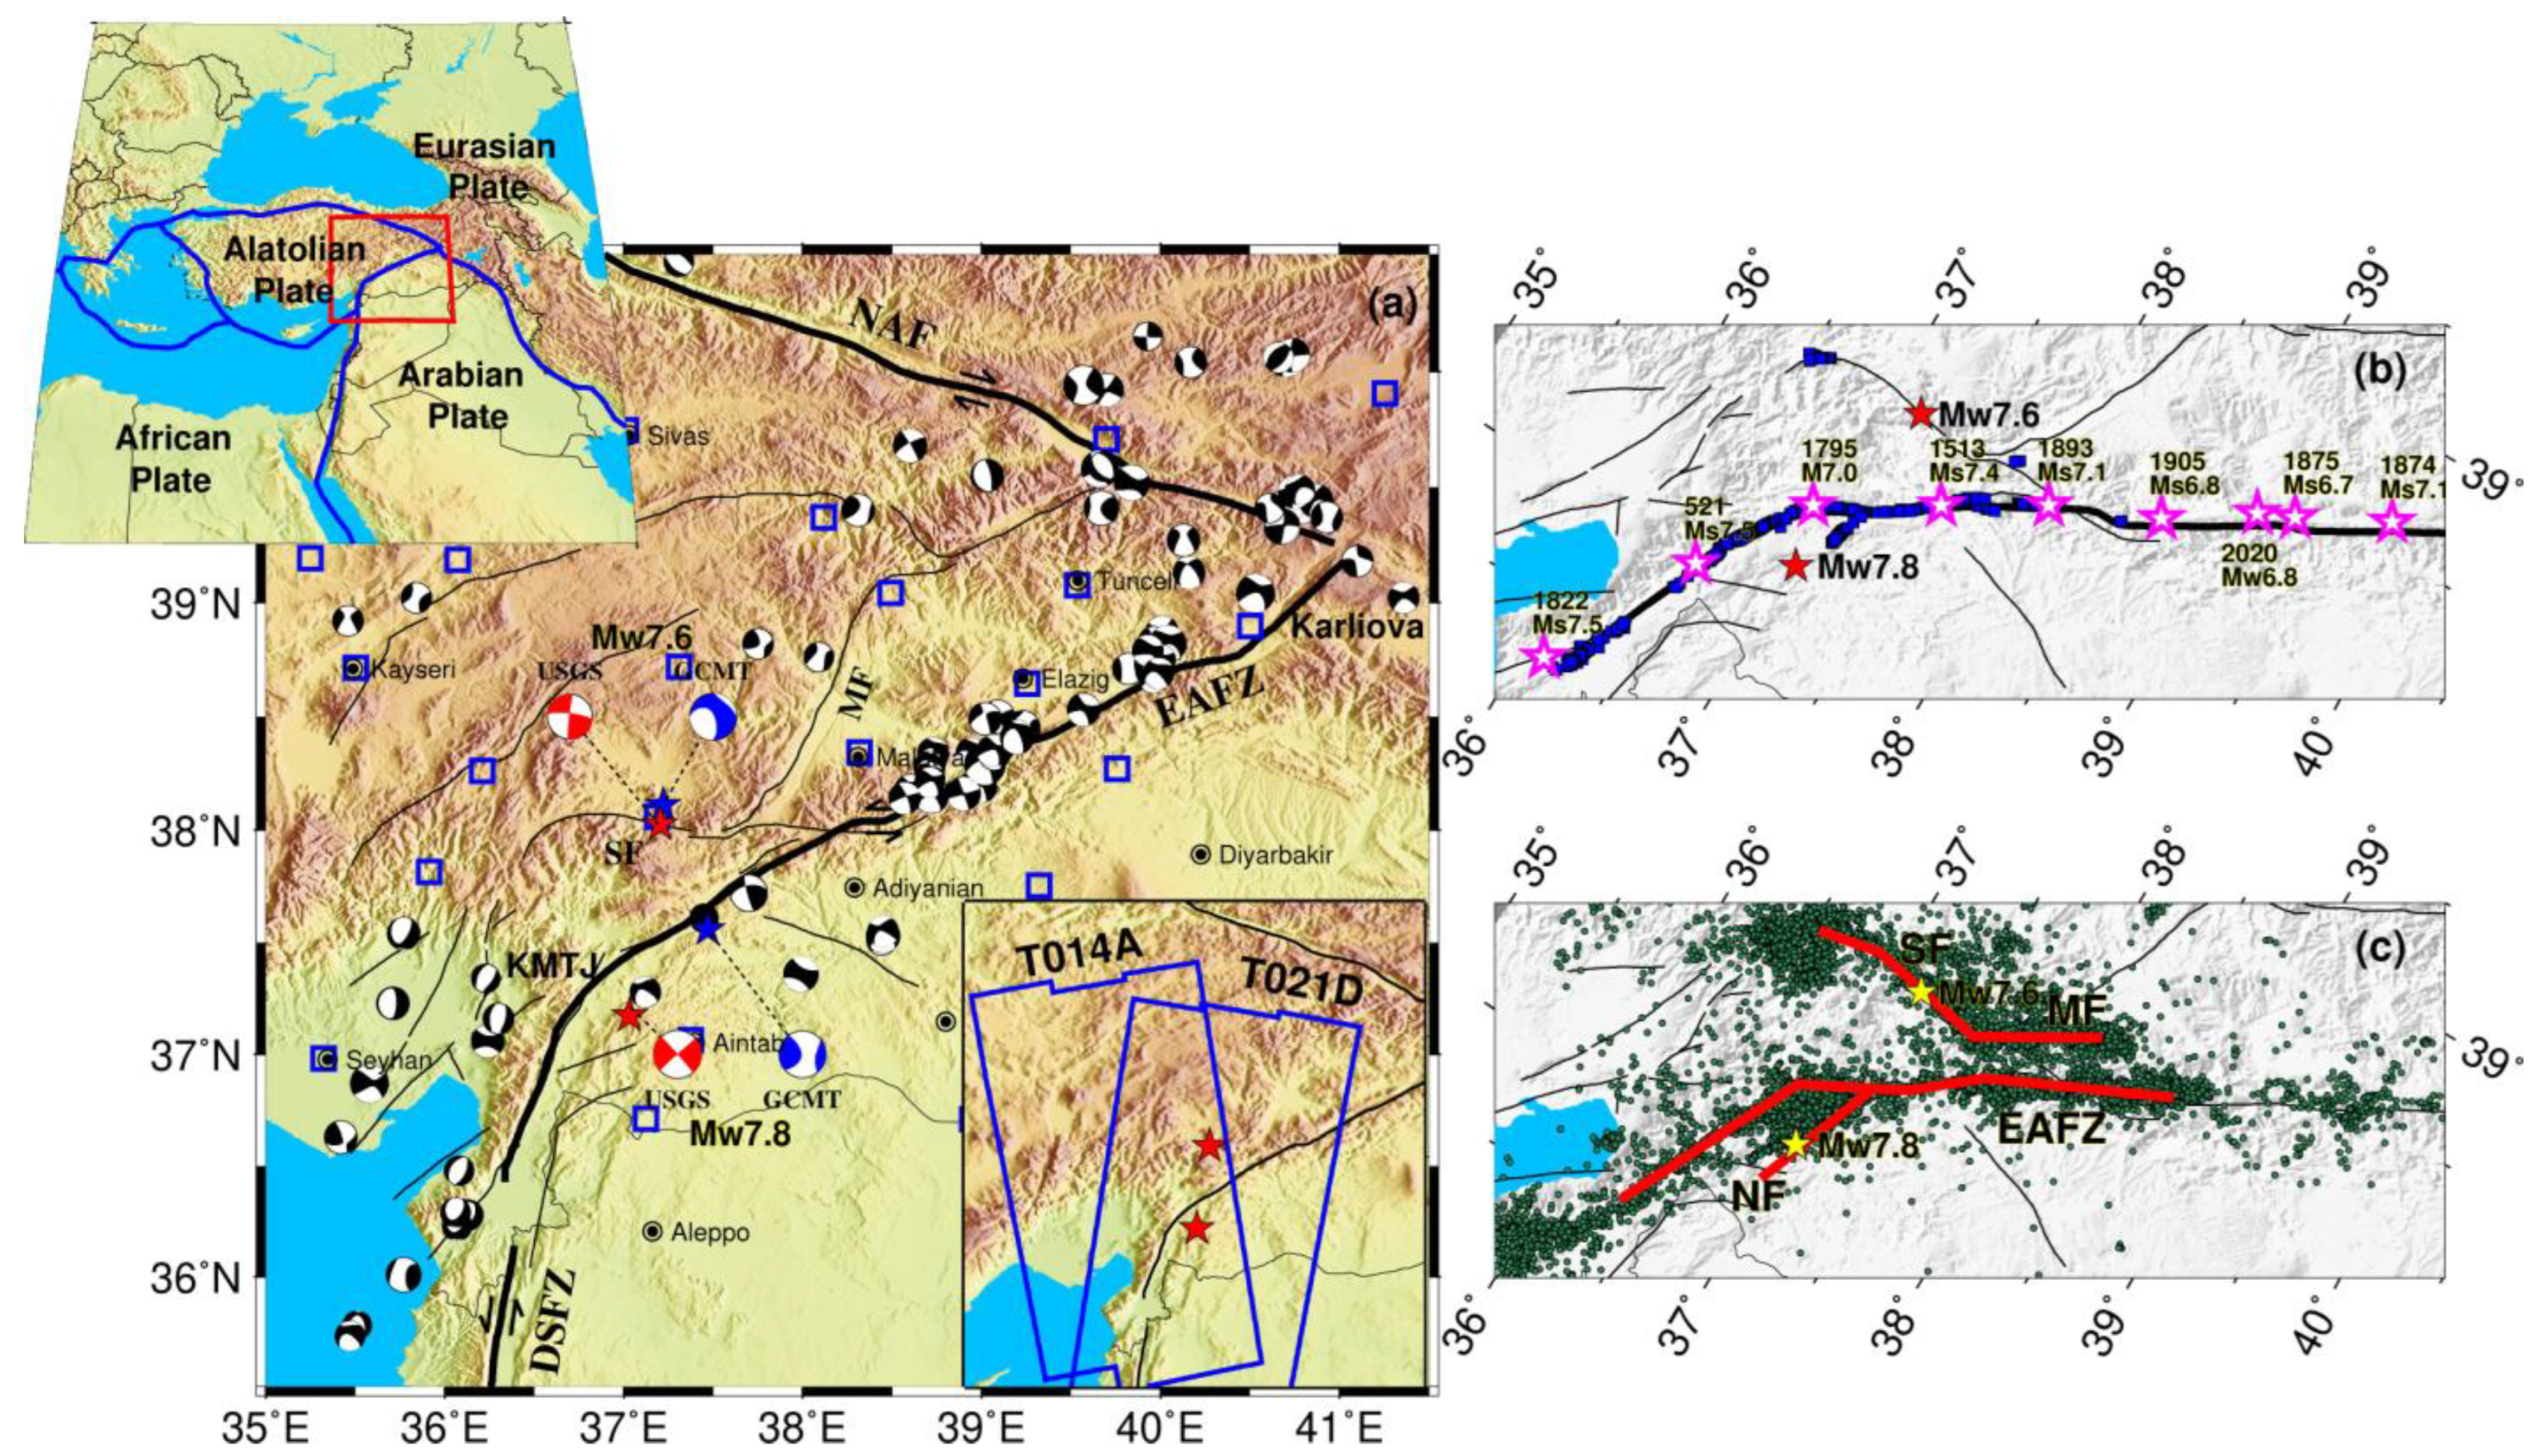 Remote Sensing | Free Full-Text | Source Model of the 2023 Turkey  Earthquake Sequence Imaged by Sentinel-1 and GPS Measurements: Implications  for Heterogeneous Fault Behavior along the East Anatolian Fault Zone